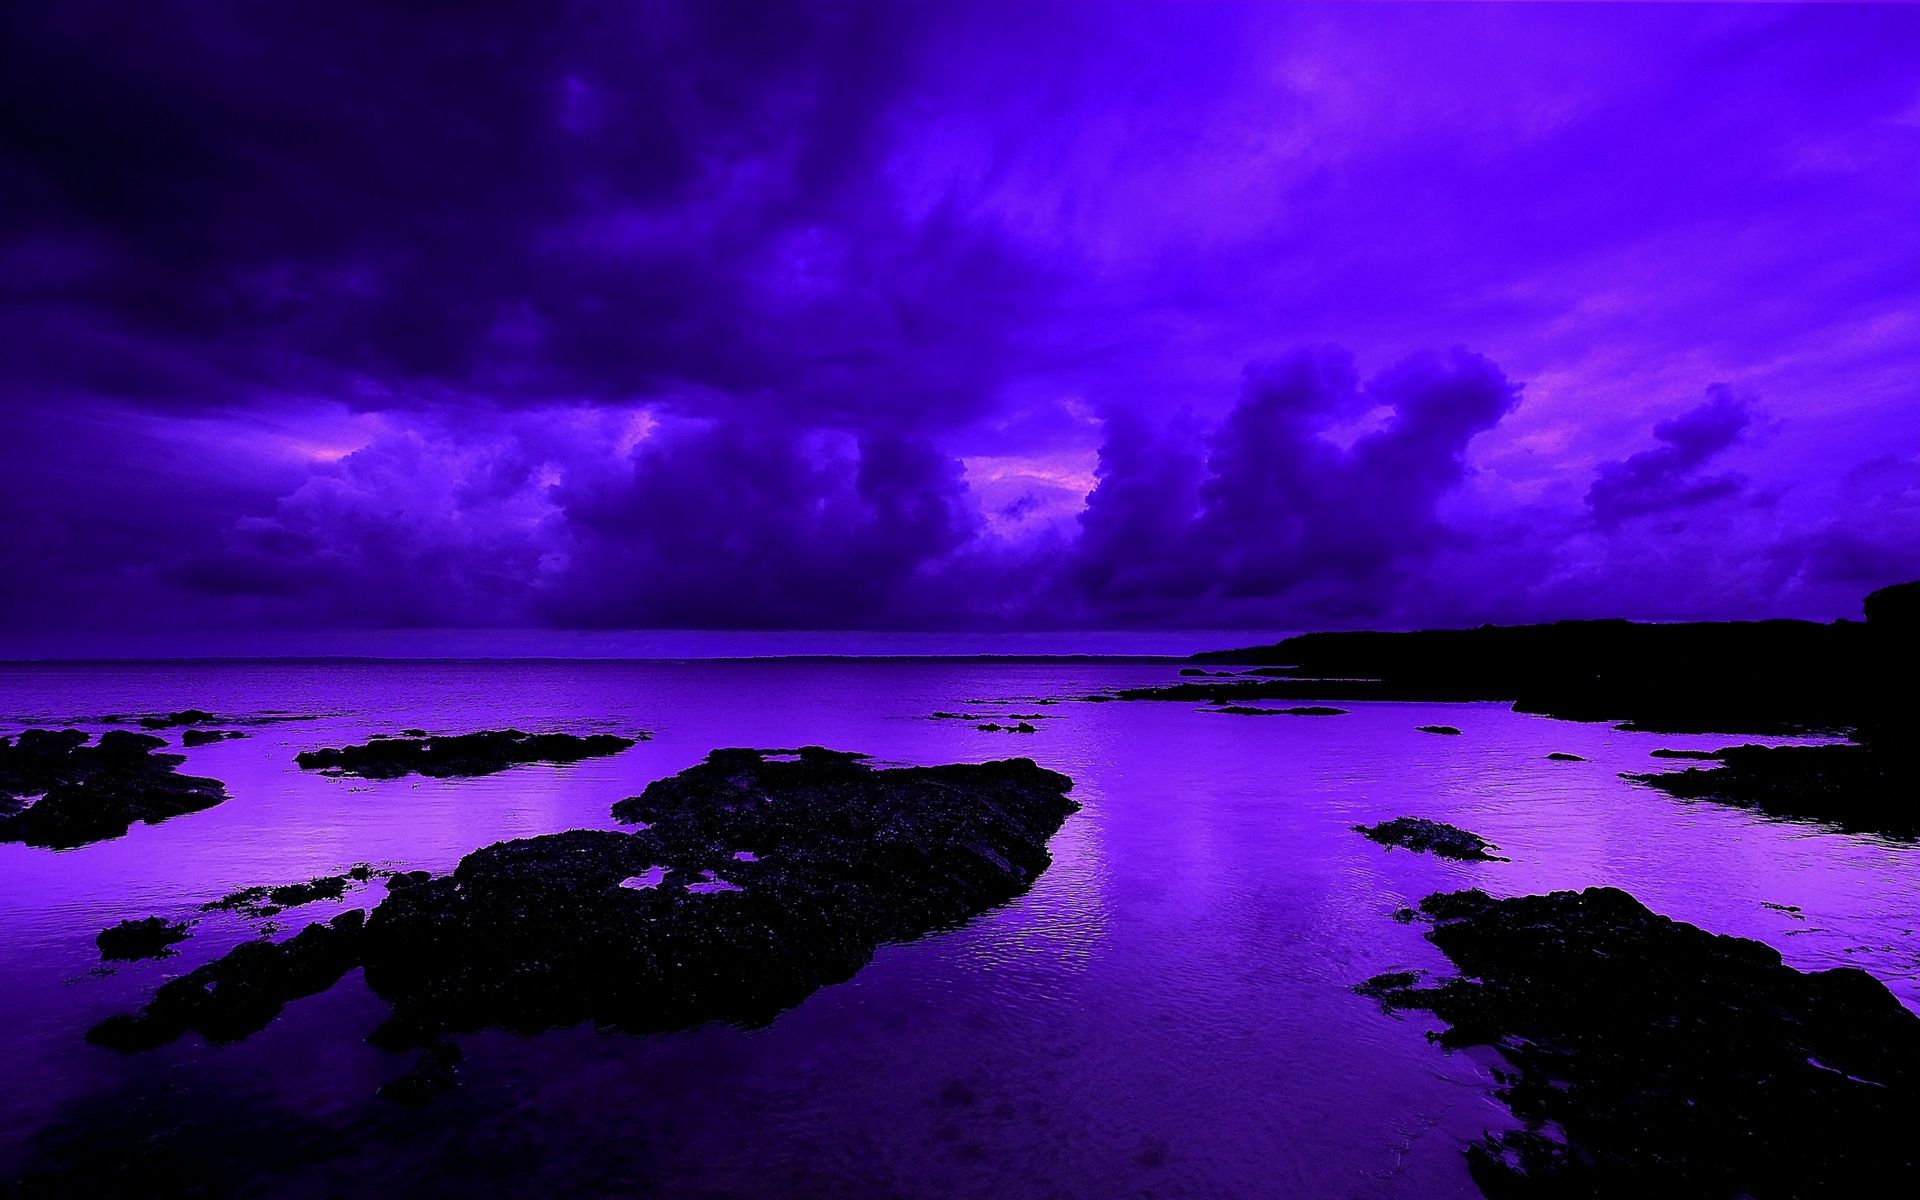 Violet Background, High Definition, High Quality, Widescreen. Purple aesthetic, Lilac sky, Violet background